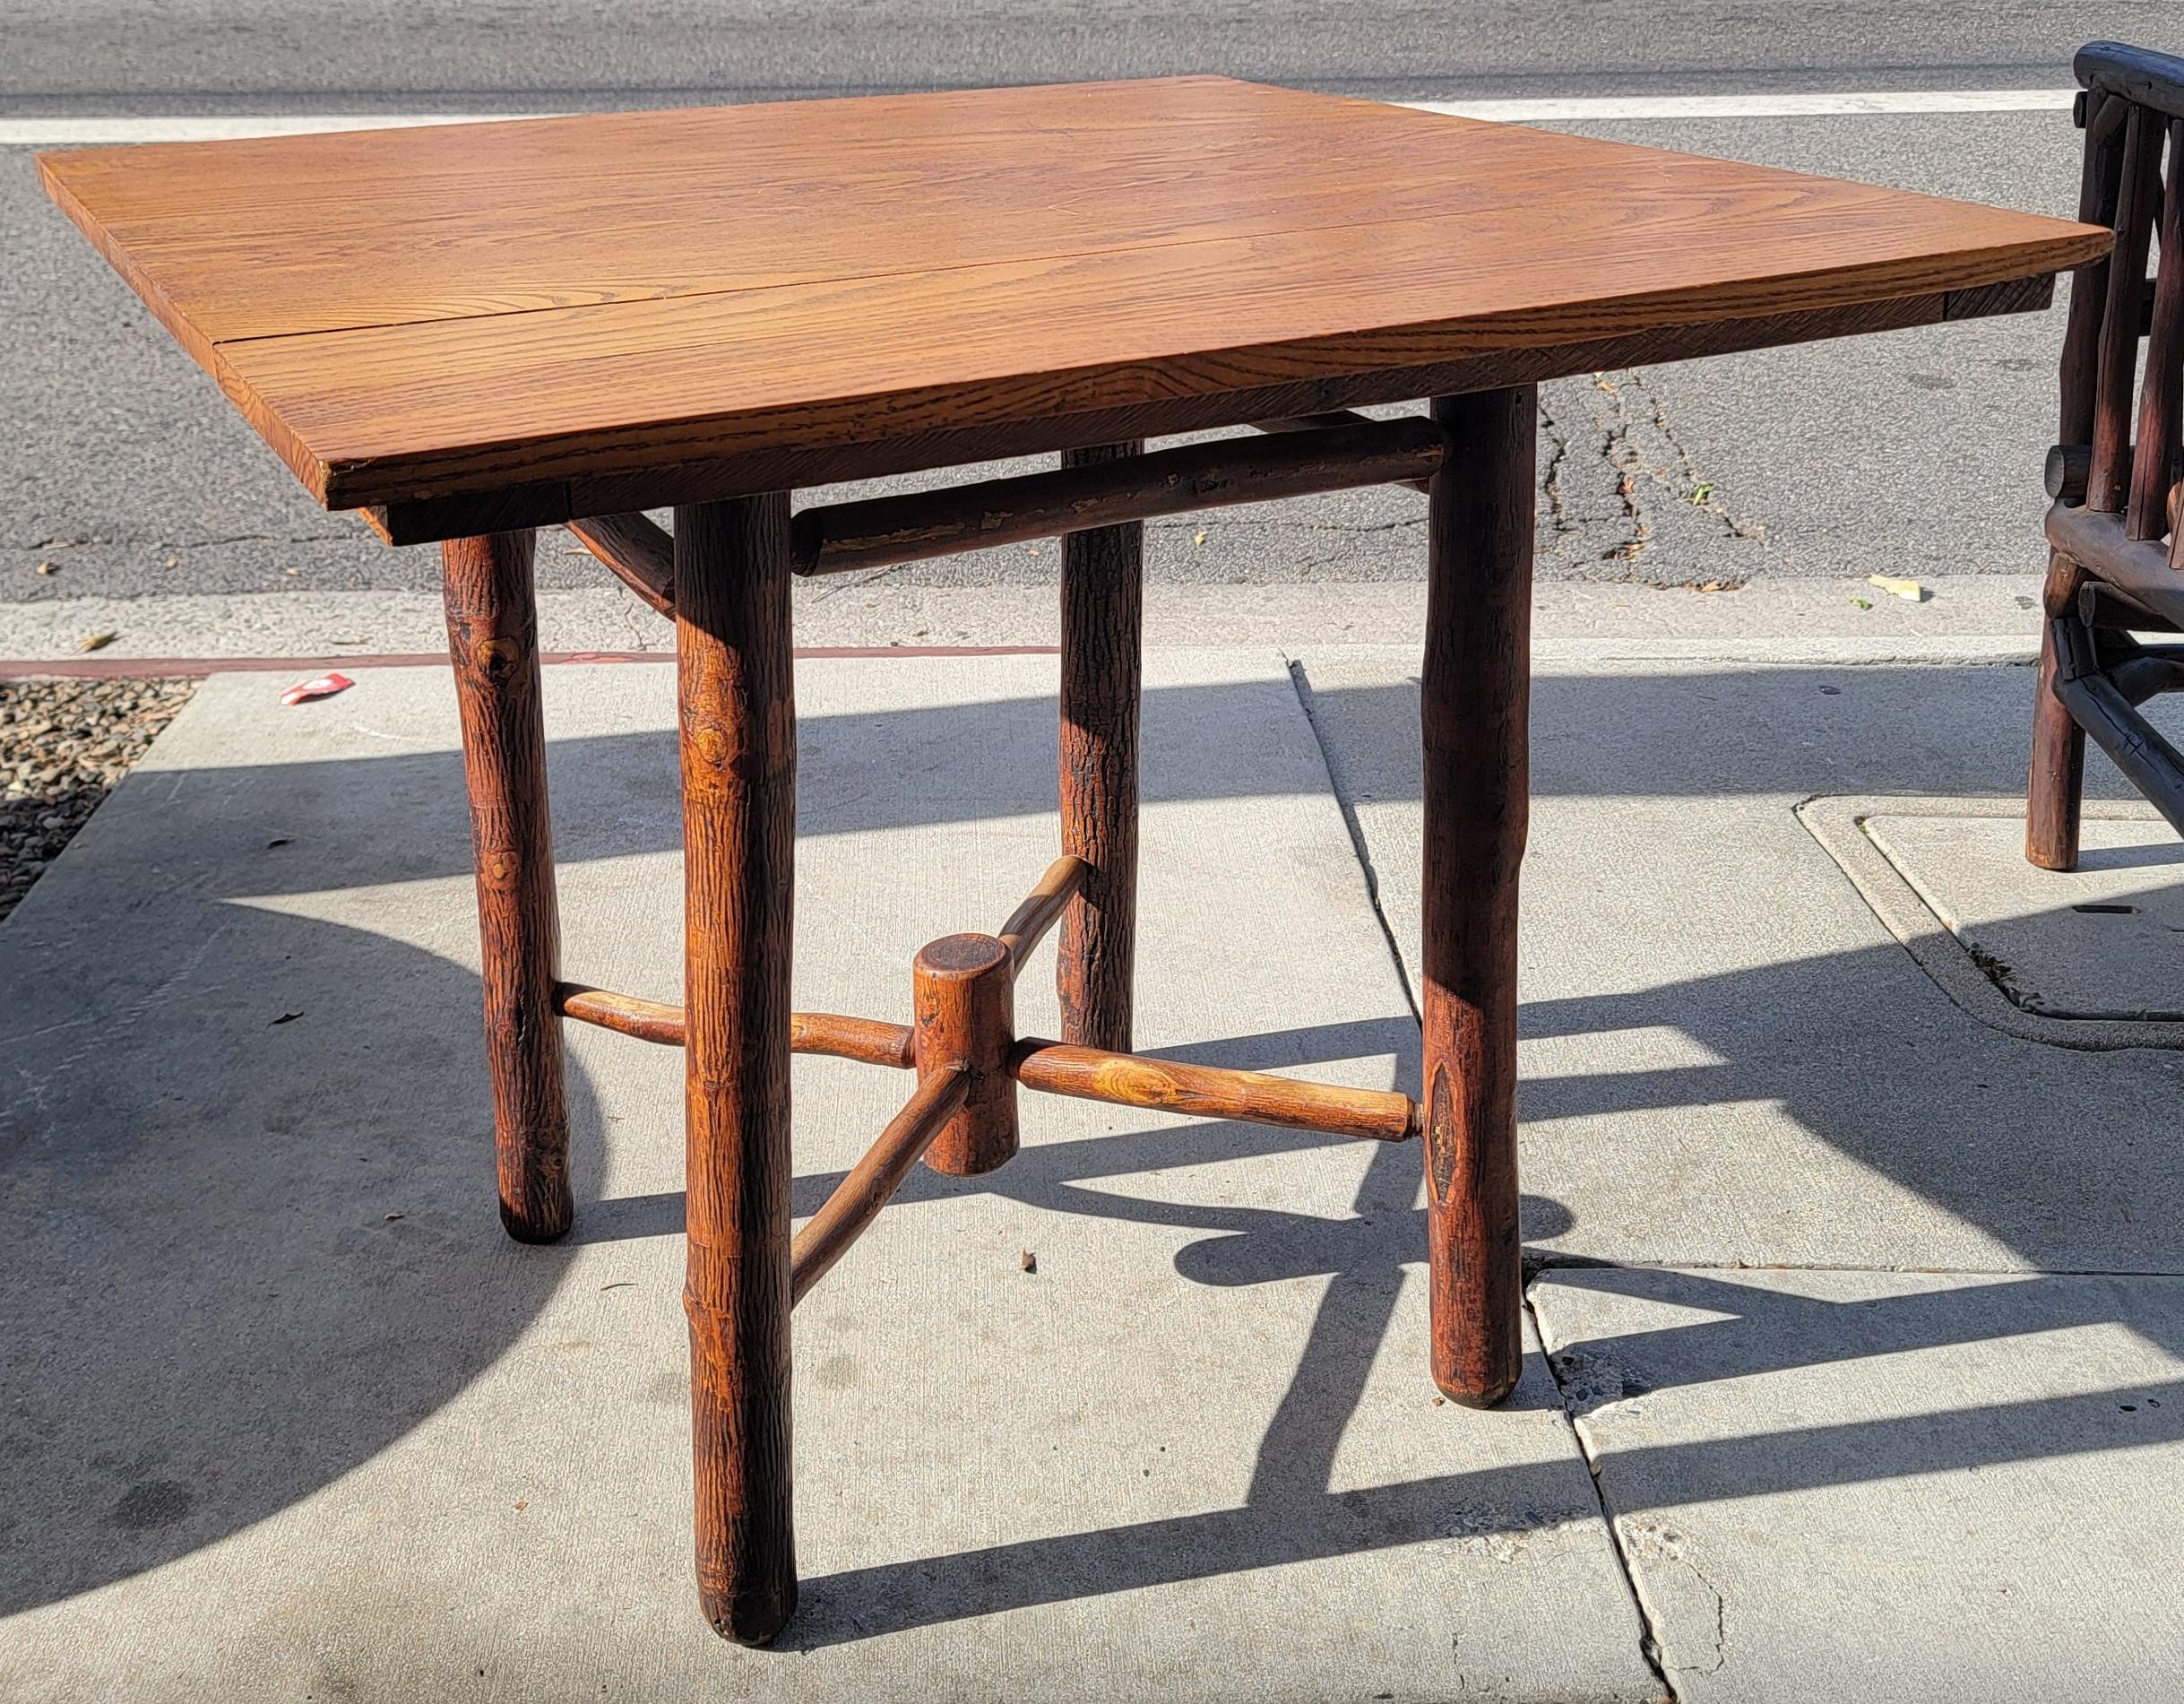 This fine oversize gaming table or small dinning table is in fine sturdy condition.This signed Old Hickory Martinsville,Indiana is stamped under the top of the table.Wonderful original aged patina.